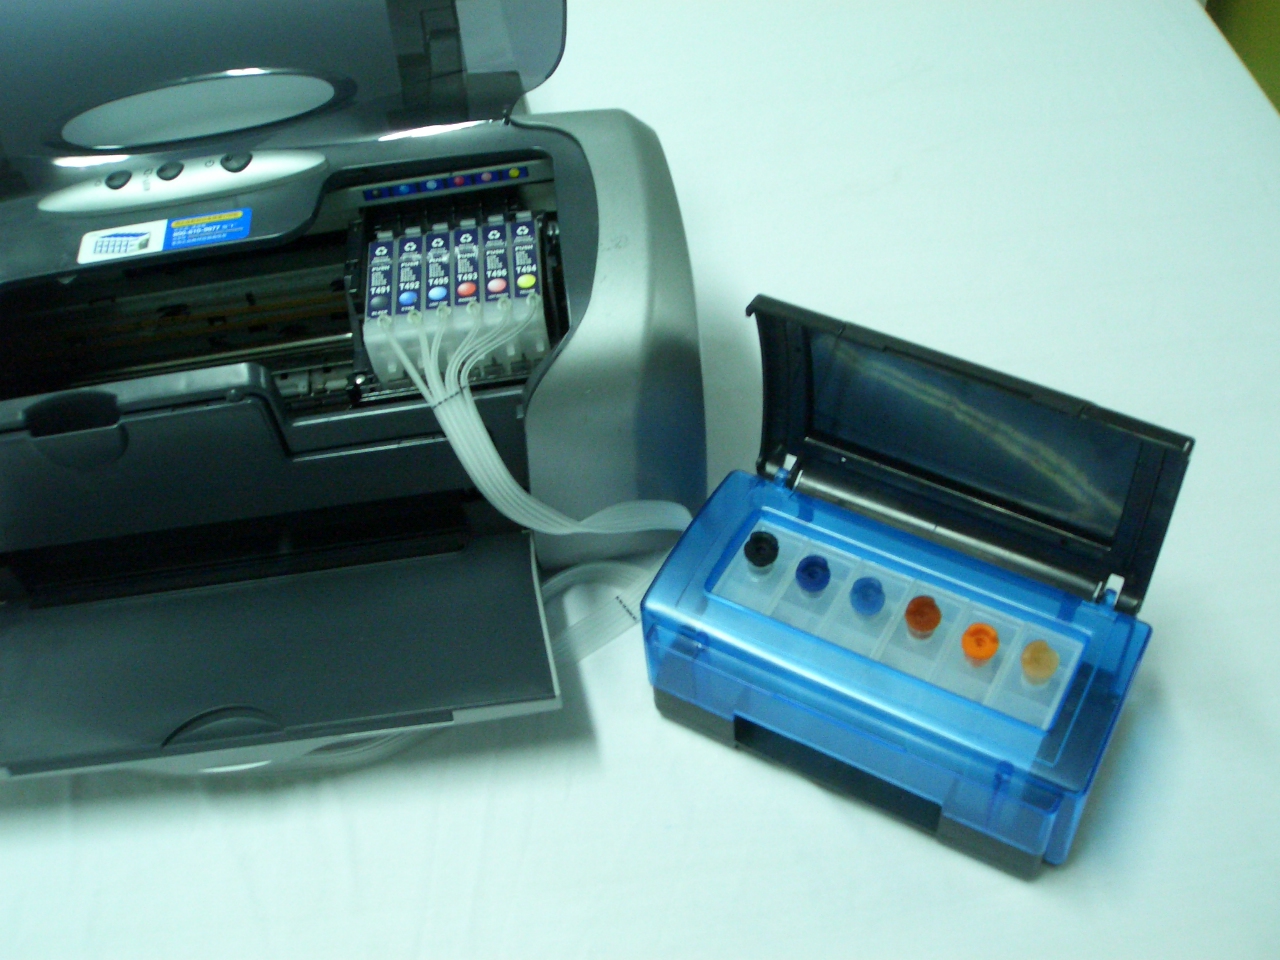 CISS (continuous ink supply system)